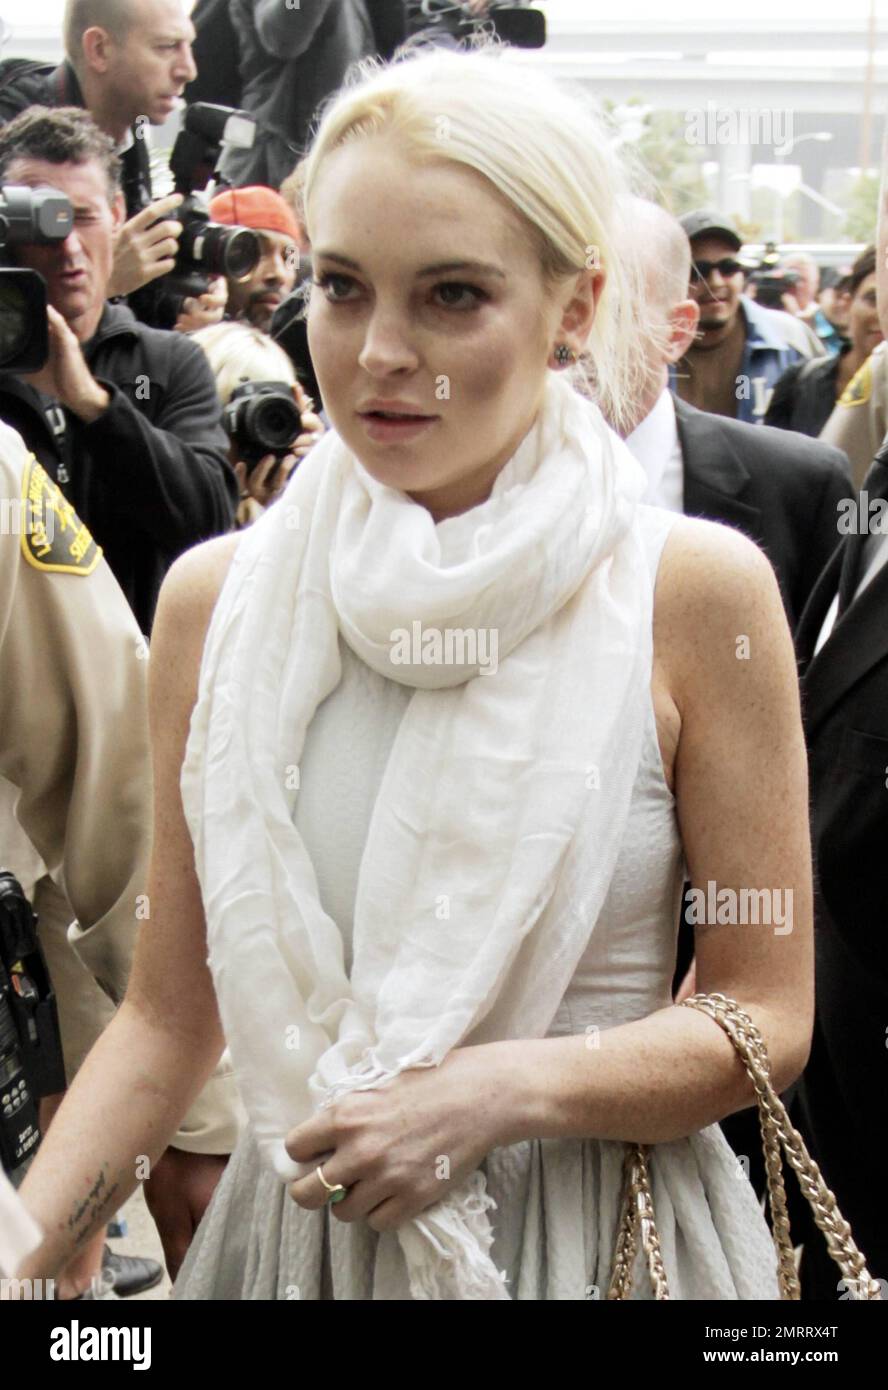 Actress Lindsay Lohan dressed in an all white ensemble arrives at the Los Angeles Municipal Court to face Judge Stephanie Sautener and review the possibility of her probation being revoked. Lohan was reportedly, kicked out of the community service the judge ordered her to complete after failing to report 9 times. The Probation Department was extremely forgiving of Lindsay's absences and reassigning her to the Red Cross but Judge Sautner did not approve of this change yanking Lindsay out of the Red Cross and reassigning her to a morgue. Today's hearing could be tense, due to the judge and Proba Stock Photo